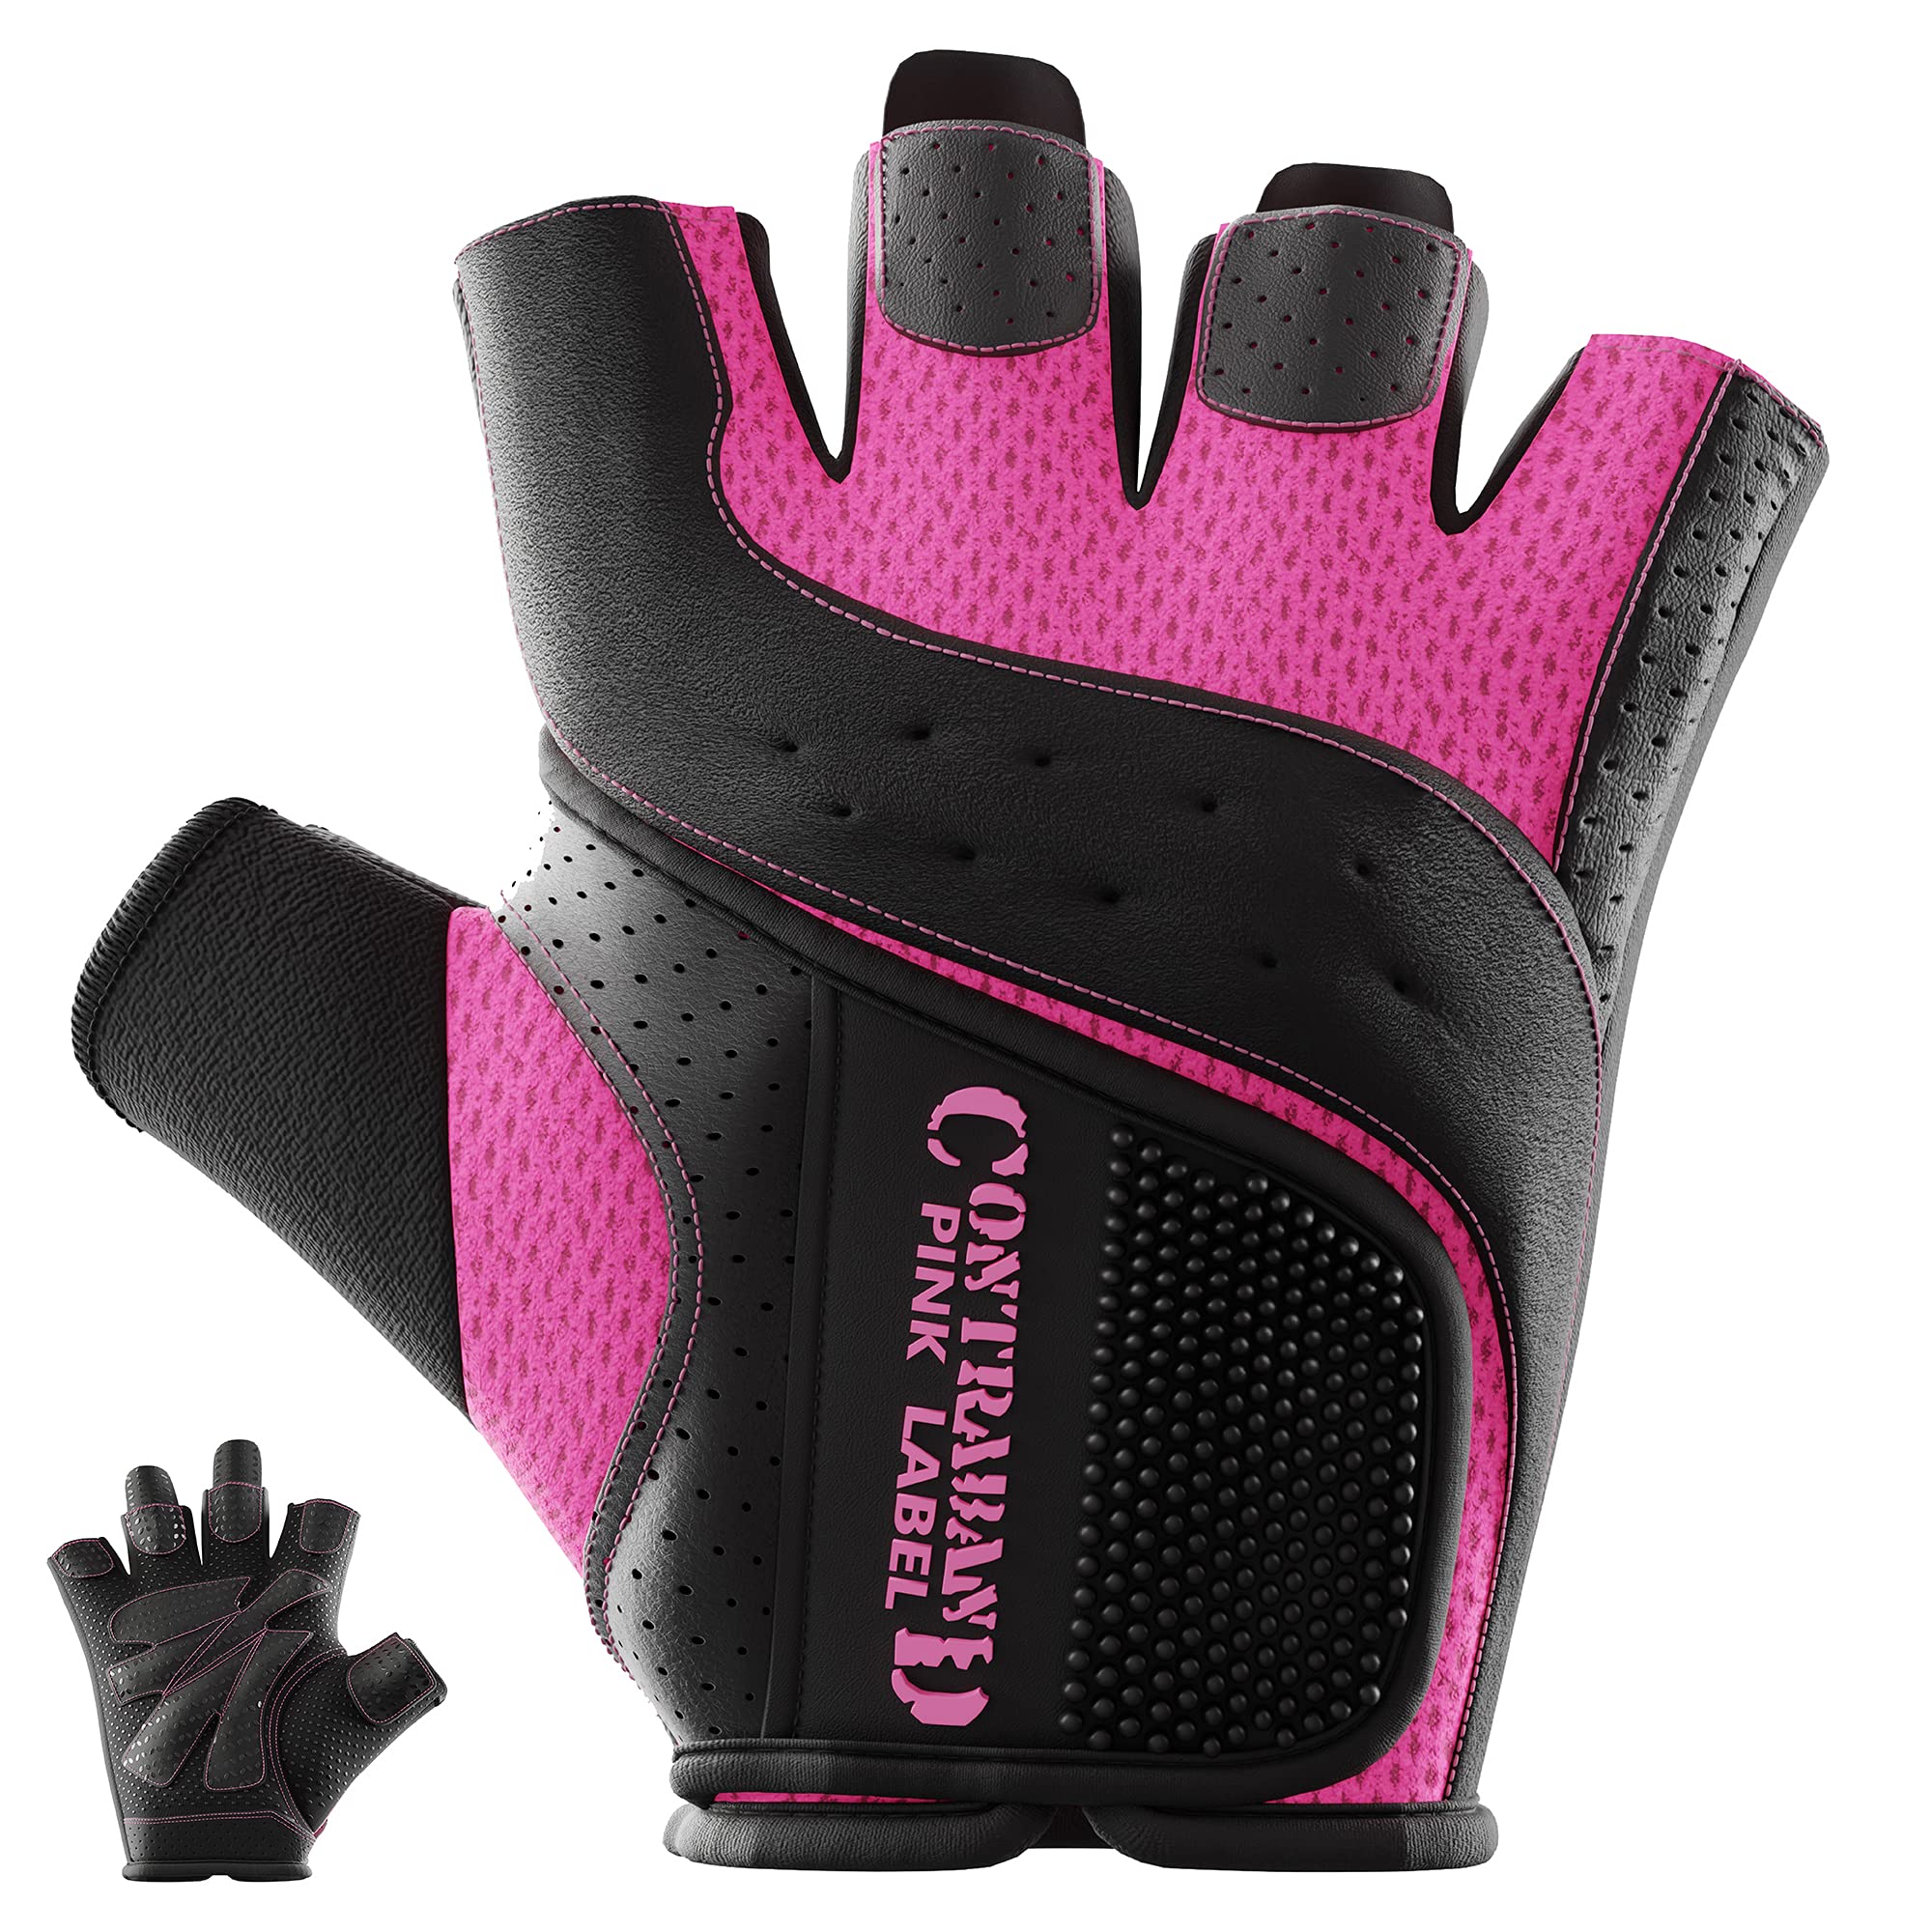 Contraband Pink Label 5137 Women's Padded Weight Lifting and